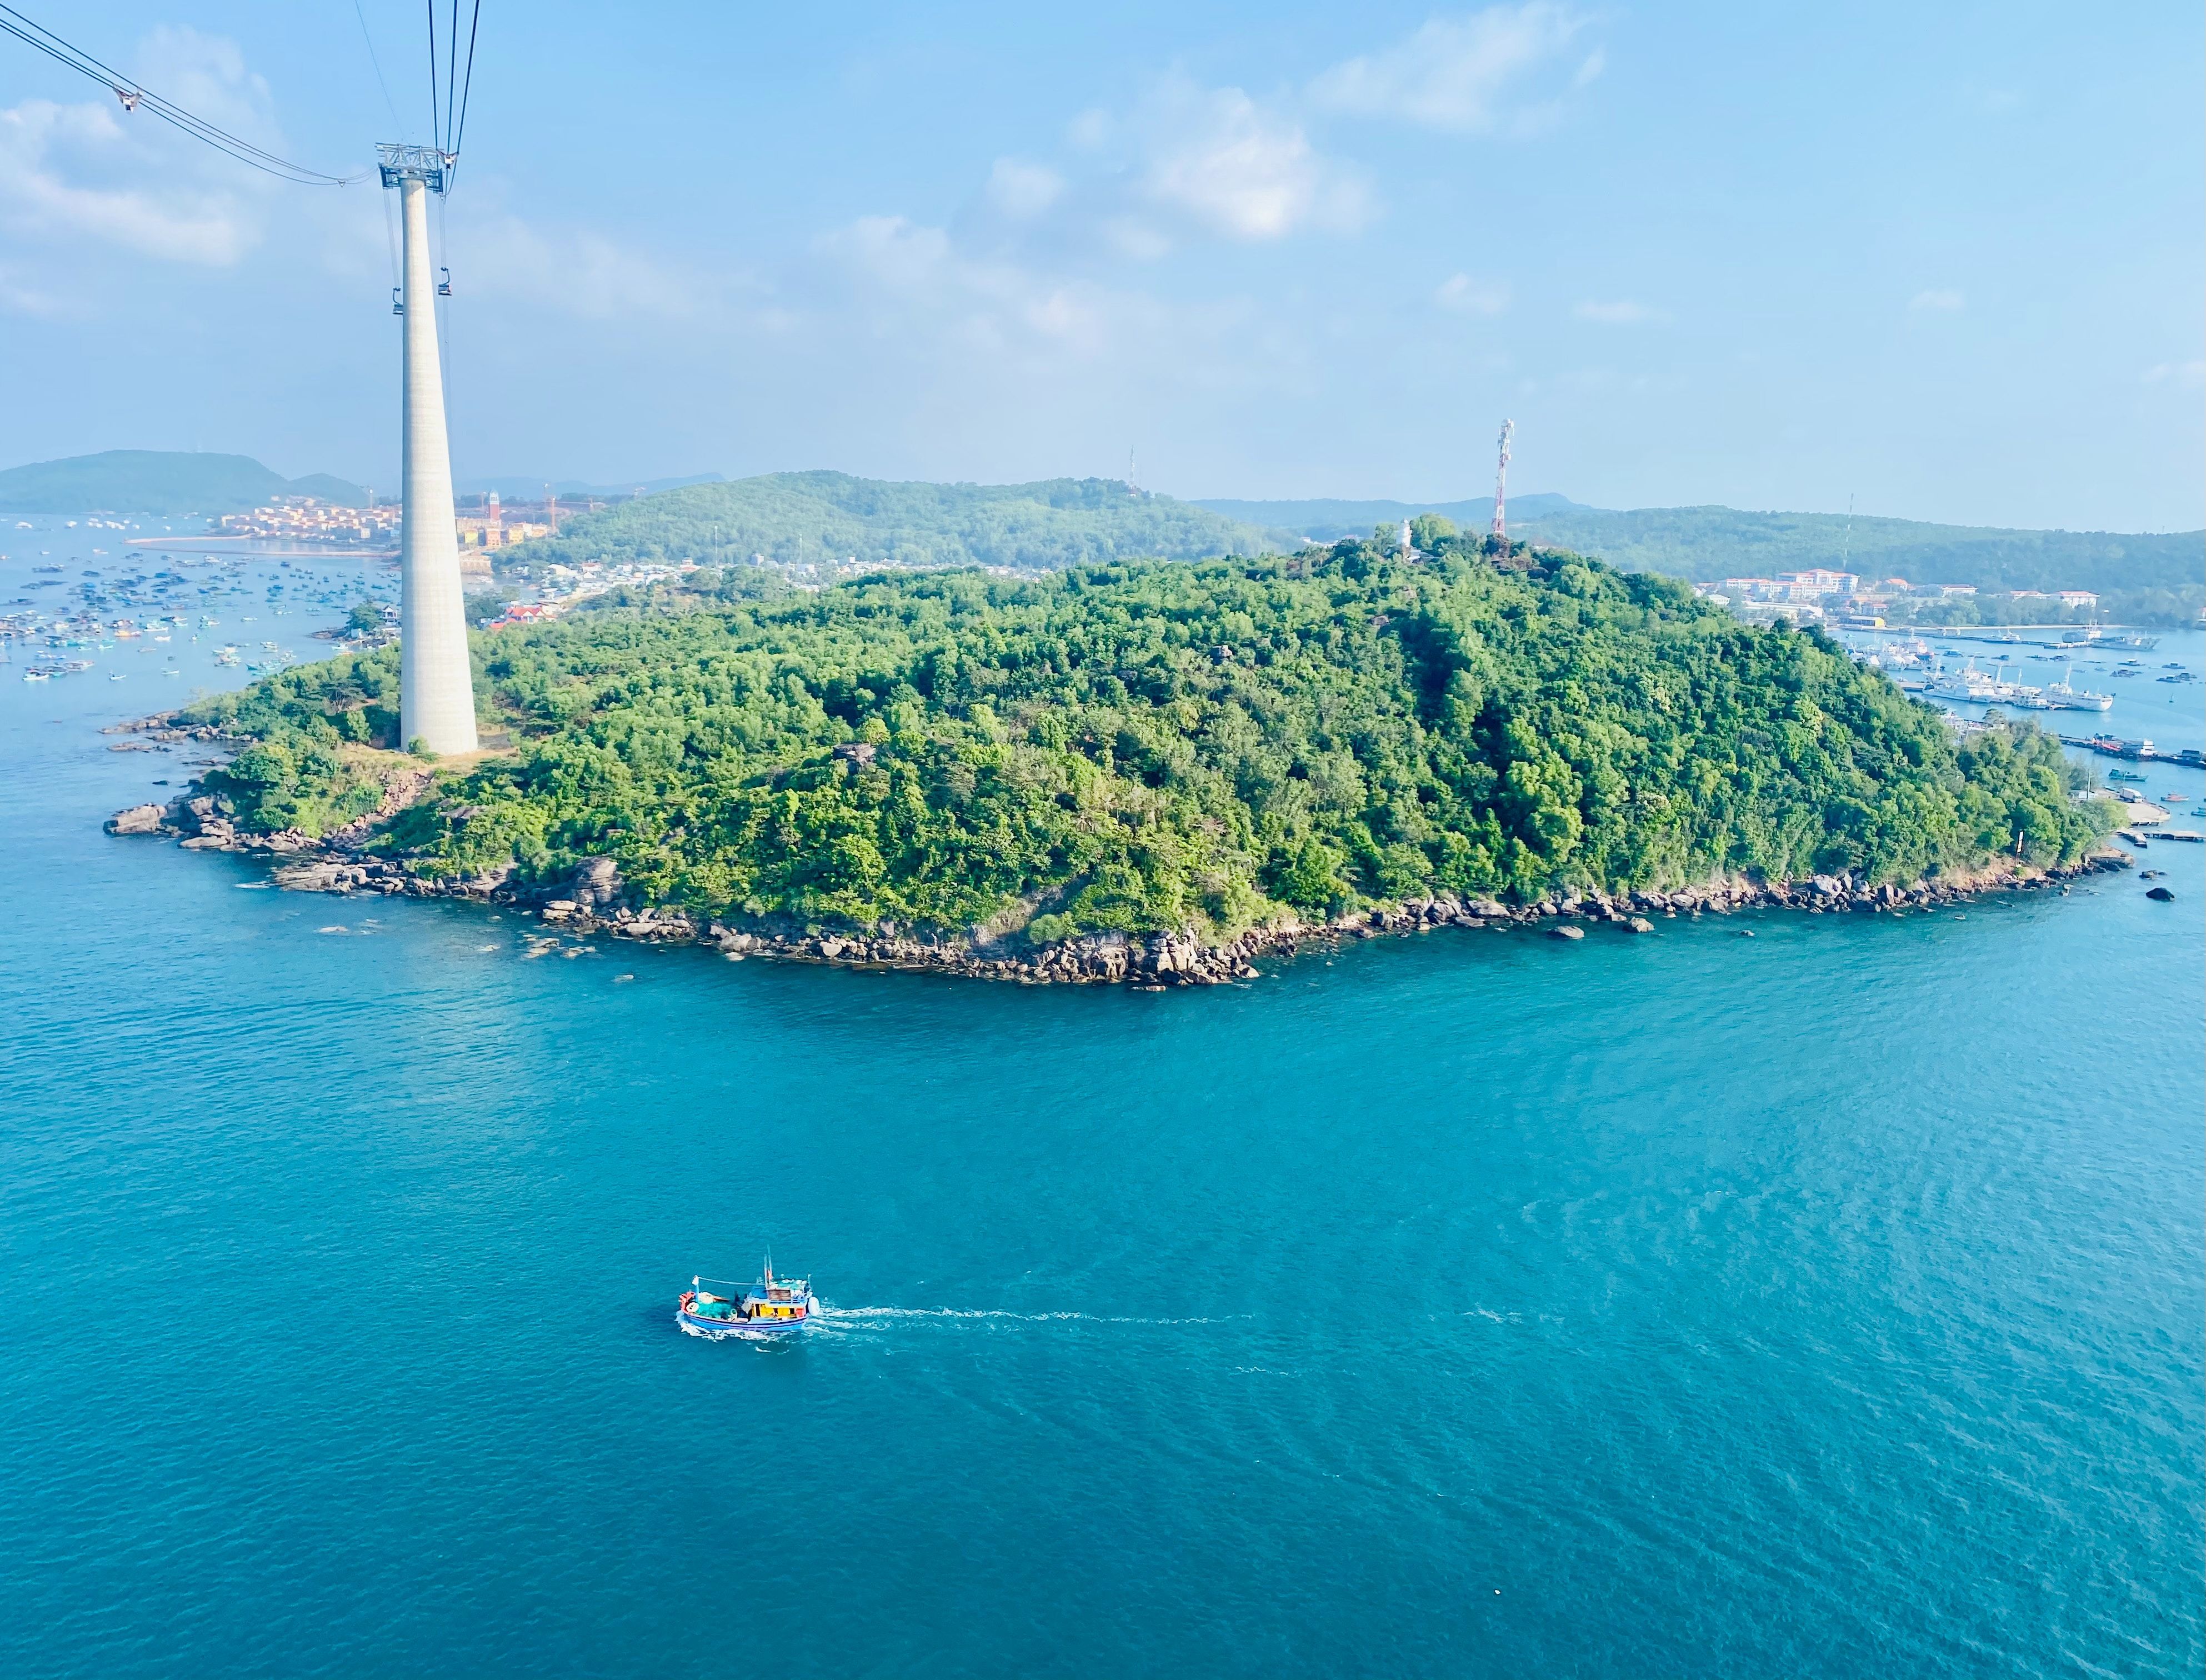 Phu Quoc Island with a tower in the background